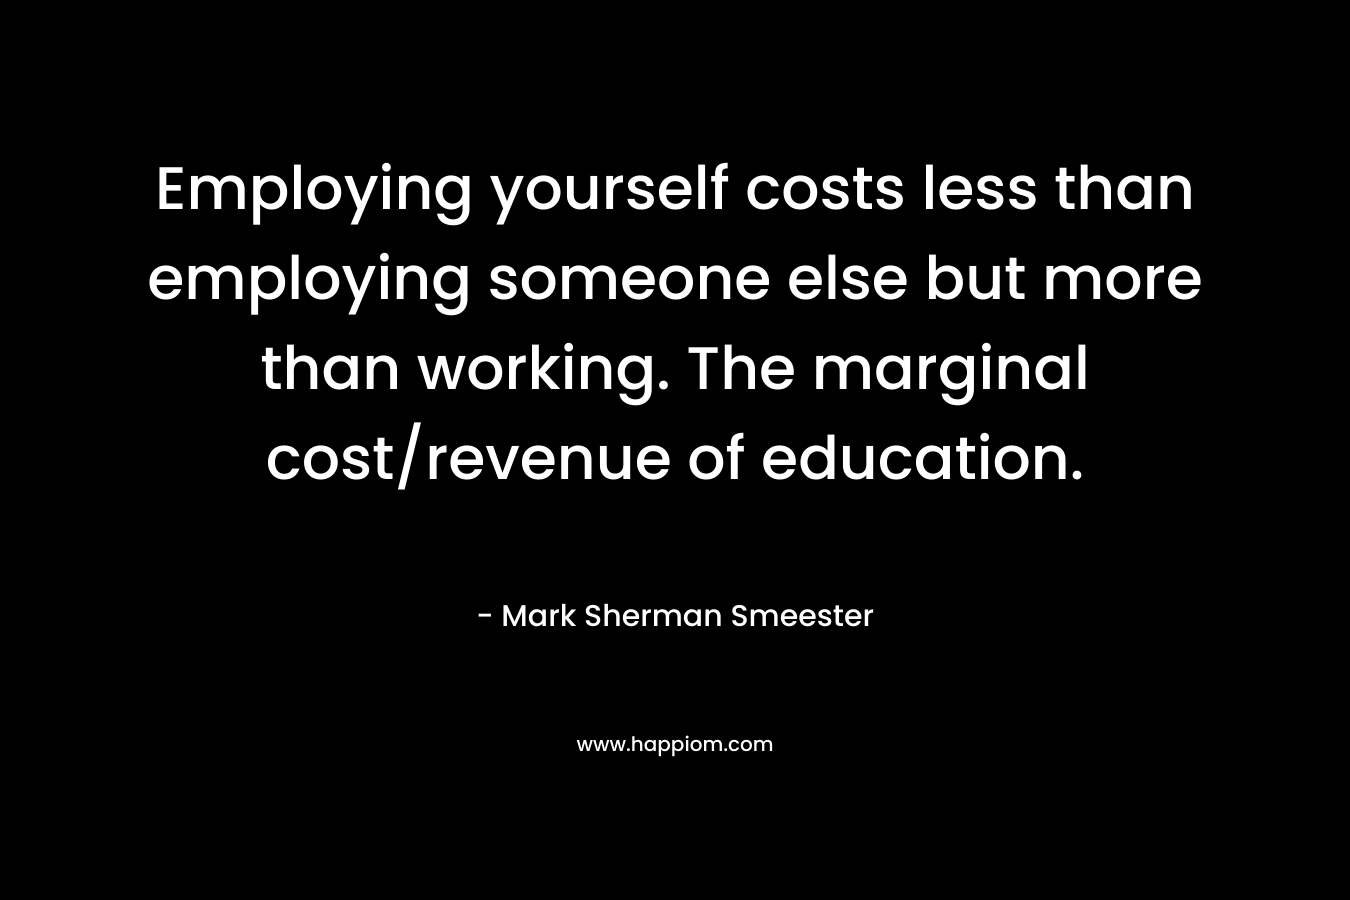 Employing yourself costs less than employing someone else but more than working. The marginal cost/revenue of education.